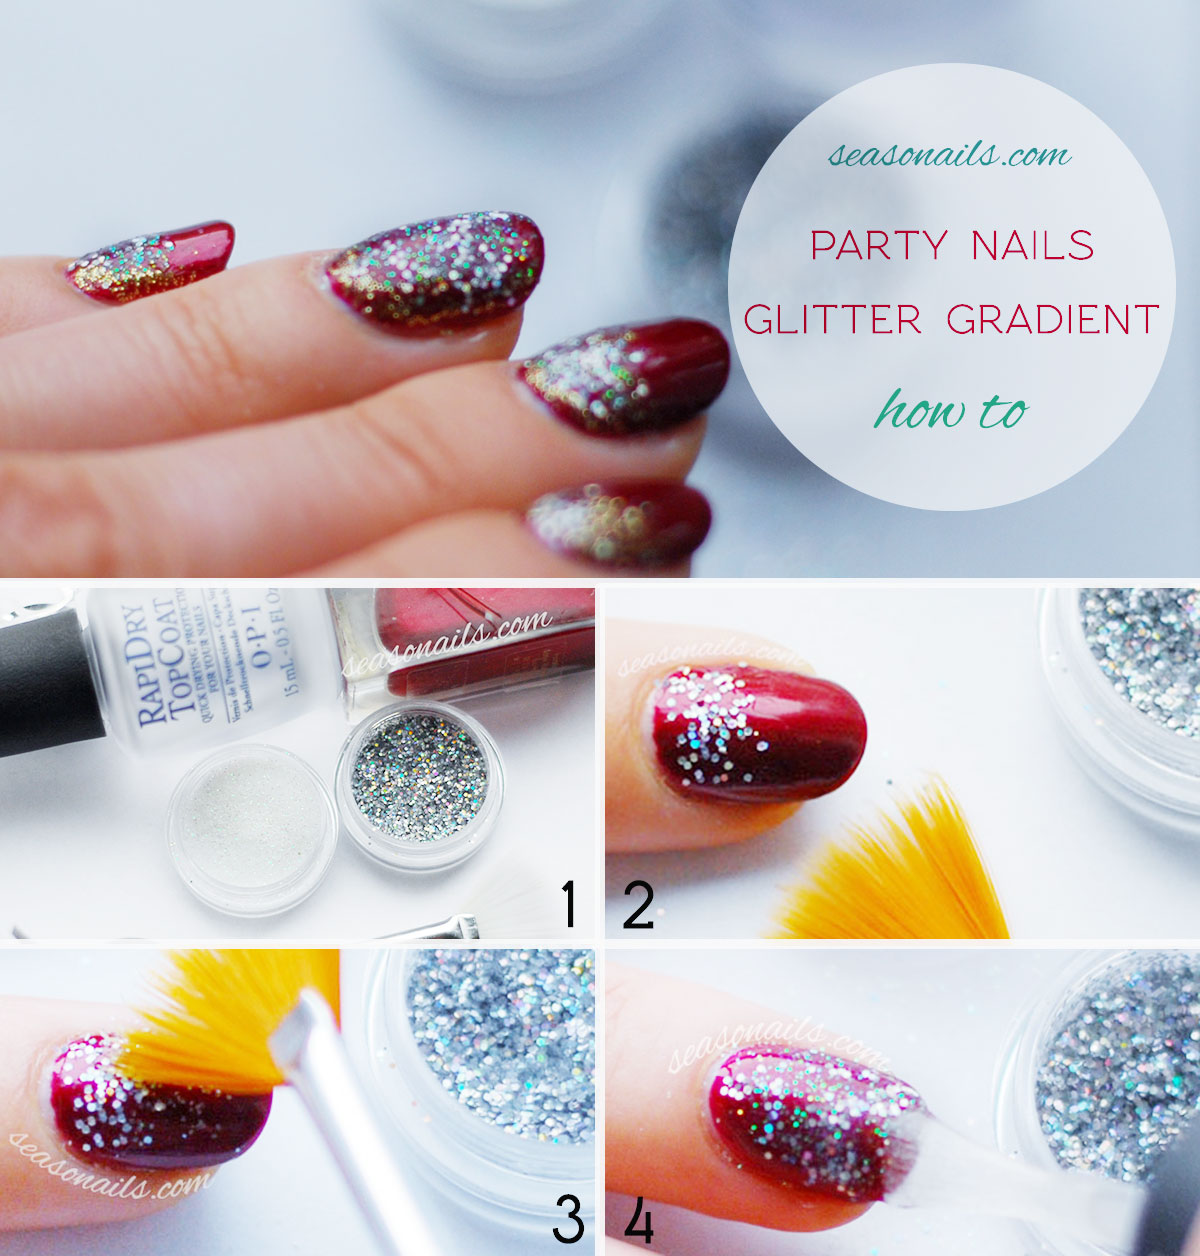 how to glitter party nails tutorial